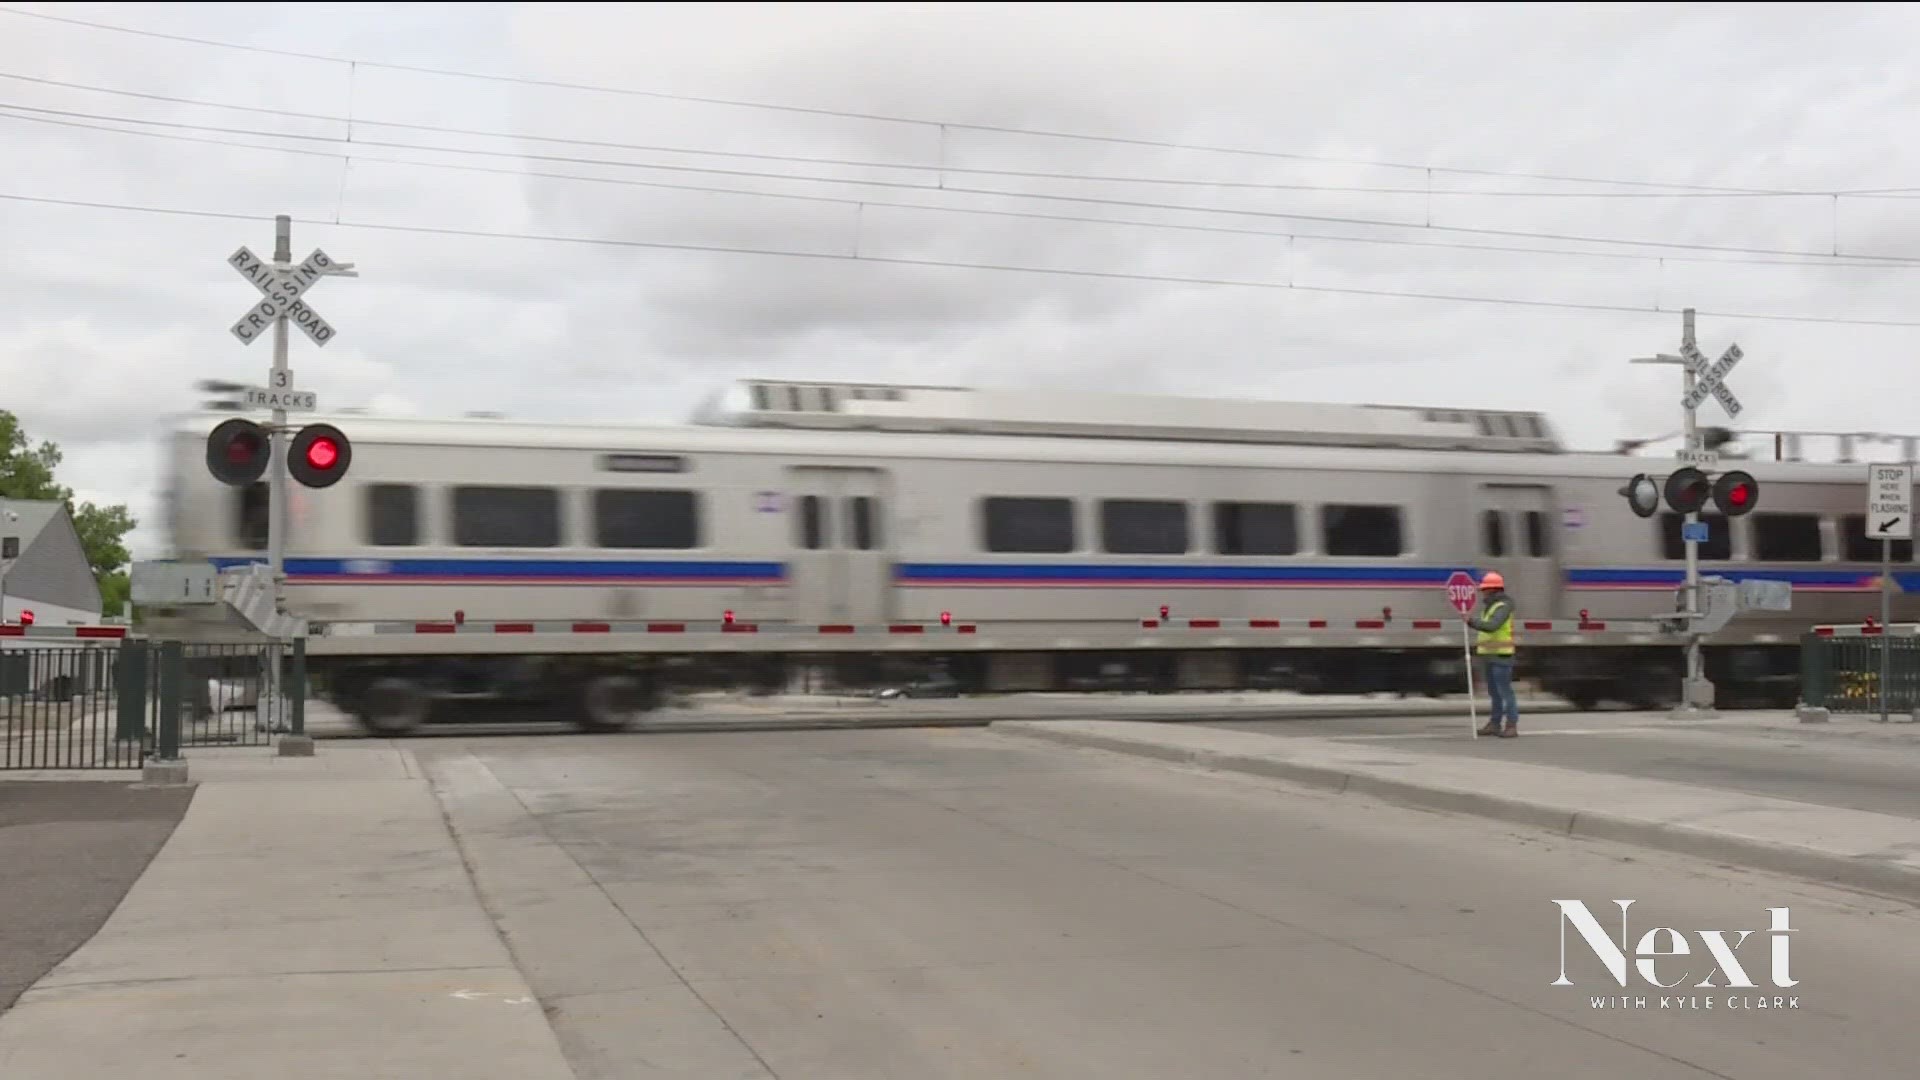 Proposal would change makeup of RTD board